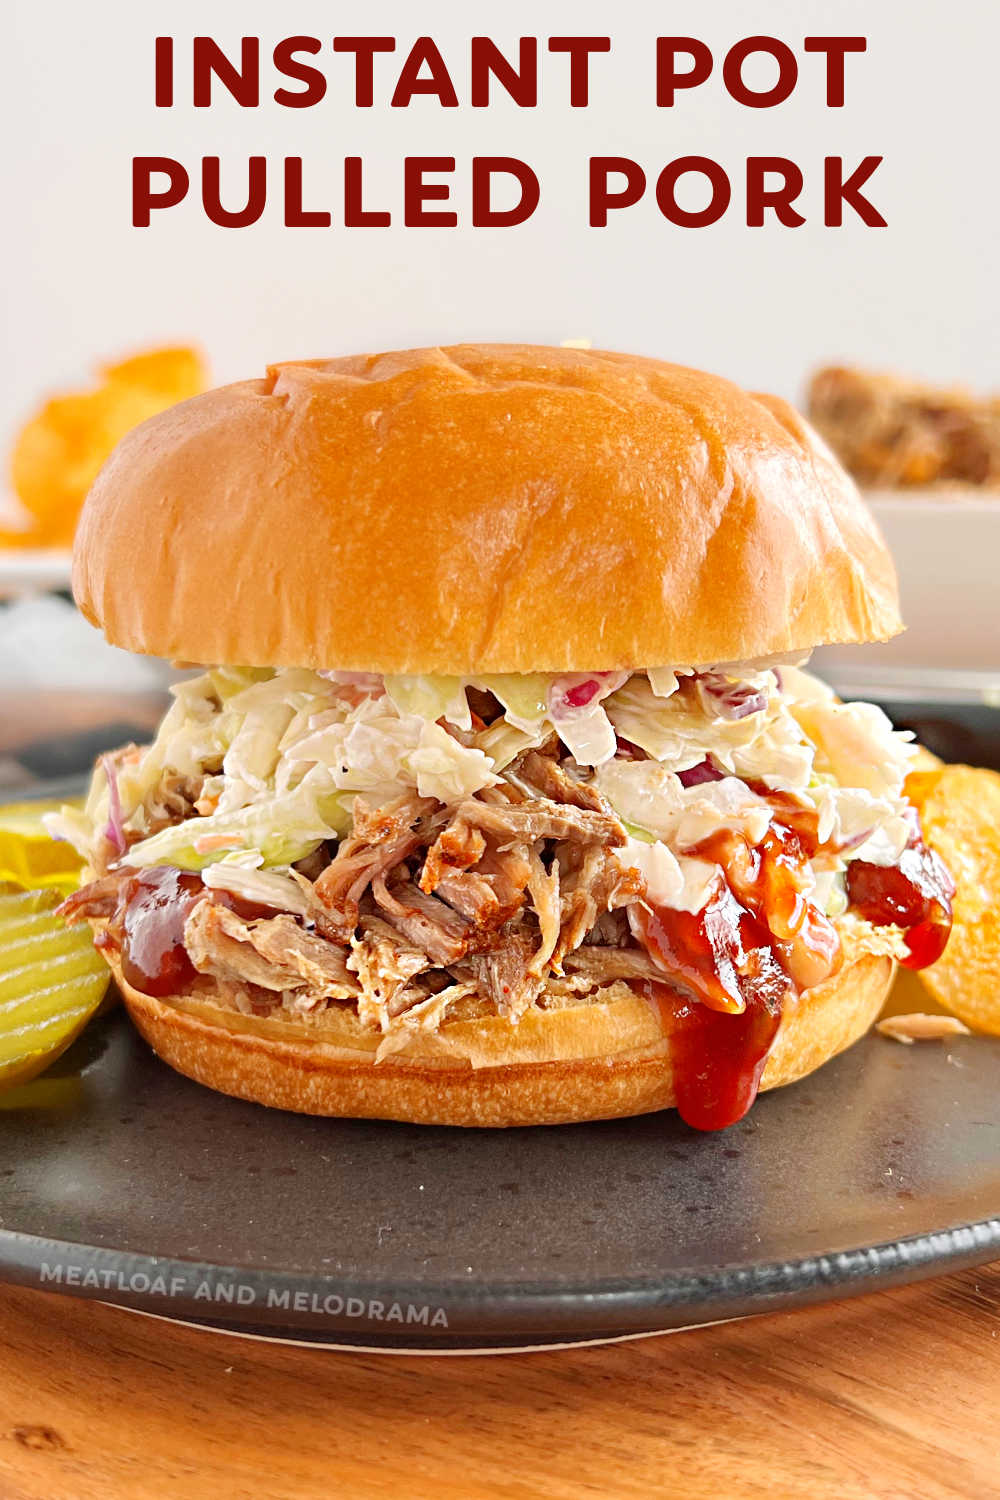 This Instant Pot Pulled Pork recipe makes the best shredded pork from a pork shoulder roast in the electric pressure cooker in about 2 hours! Use the tender meat for pulled pork sandwiches, carnitas, nachos or over mashed potatoes for an easy dinner the whole family will love! via @meamel